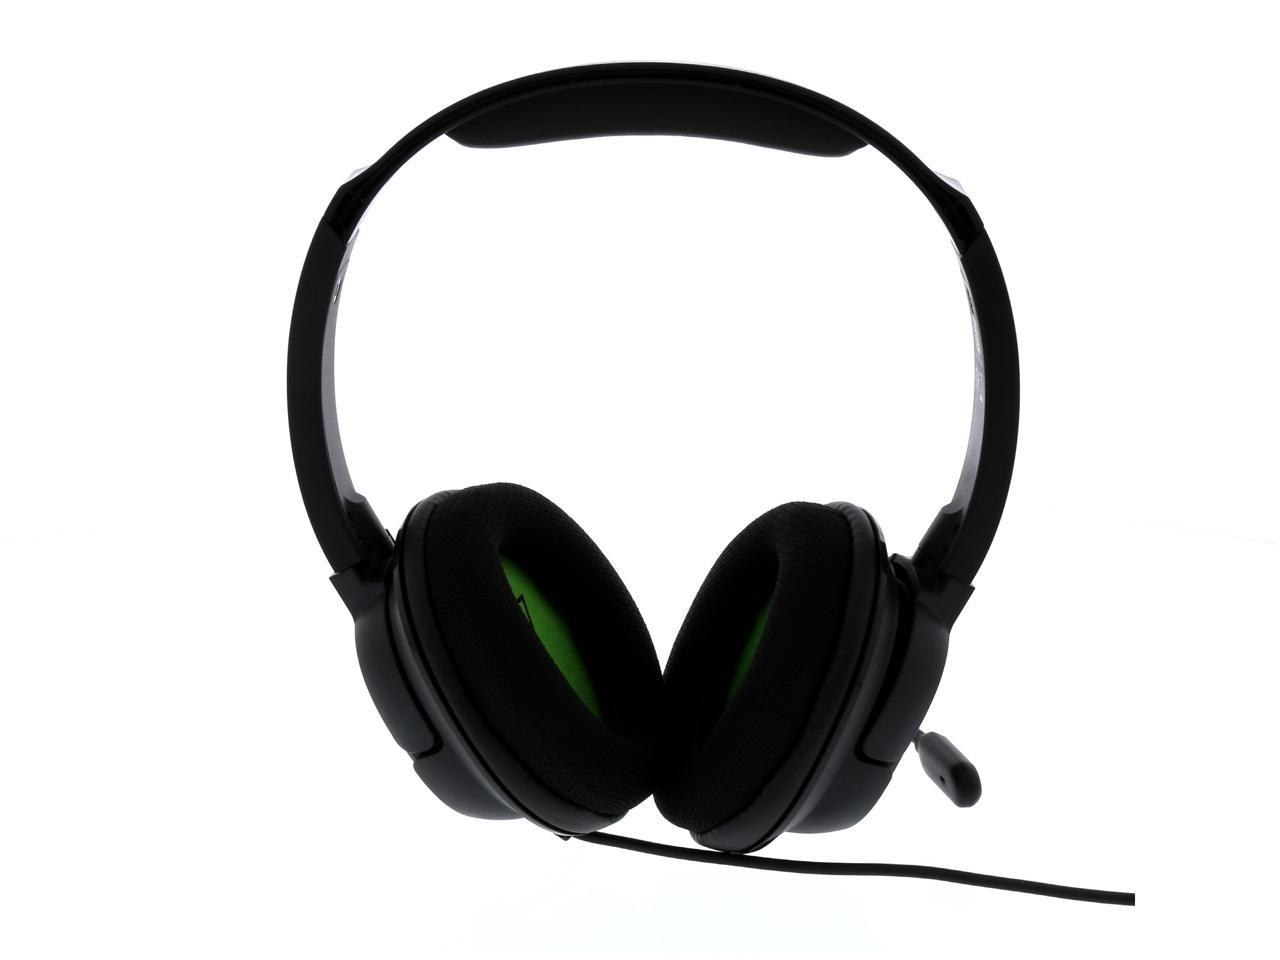 Turtle Beach Ear Force Xo One Amplified Stereo Gaming Headset For Xbox